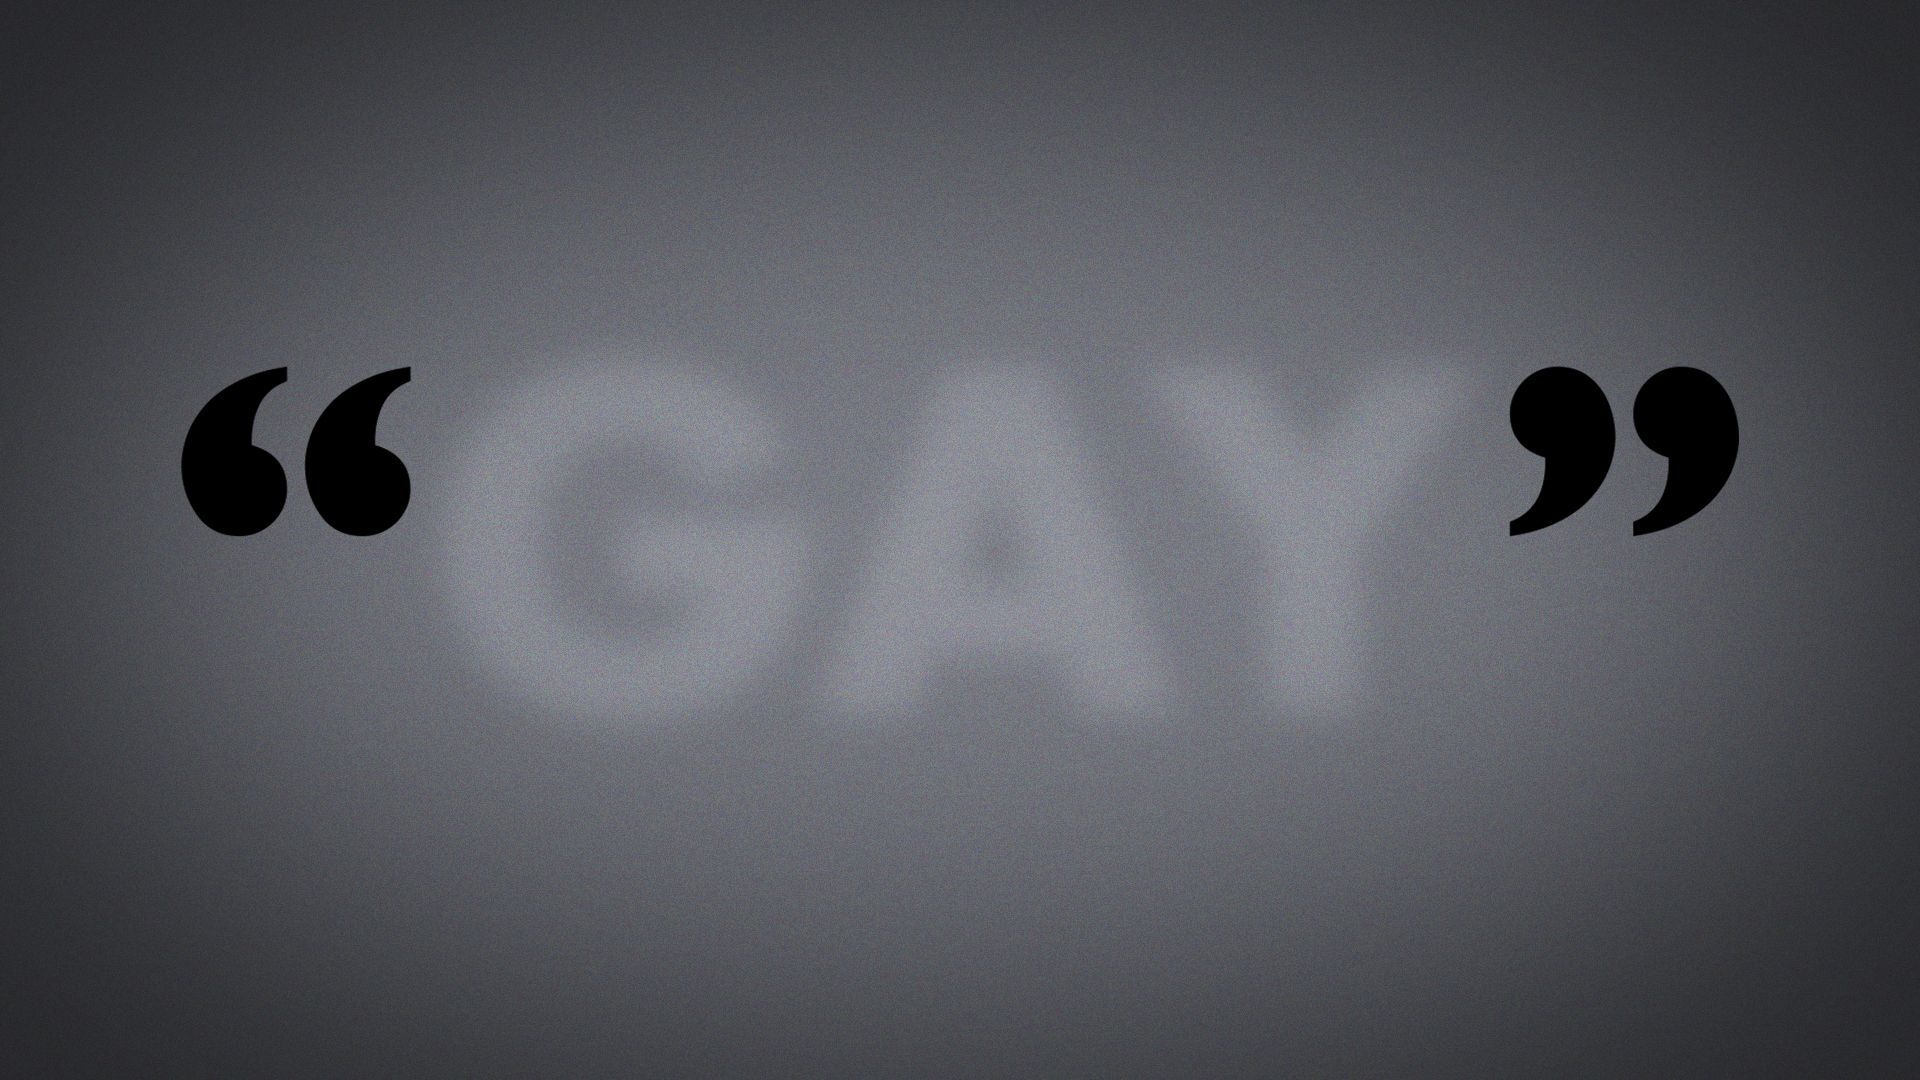 Illustration of the word "GAY" disappearing between quotation marks.